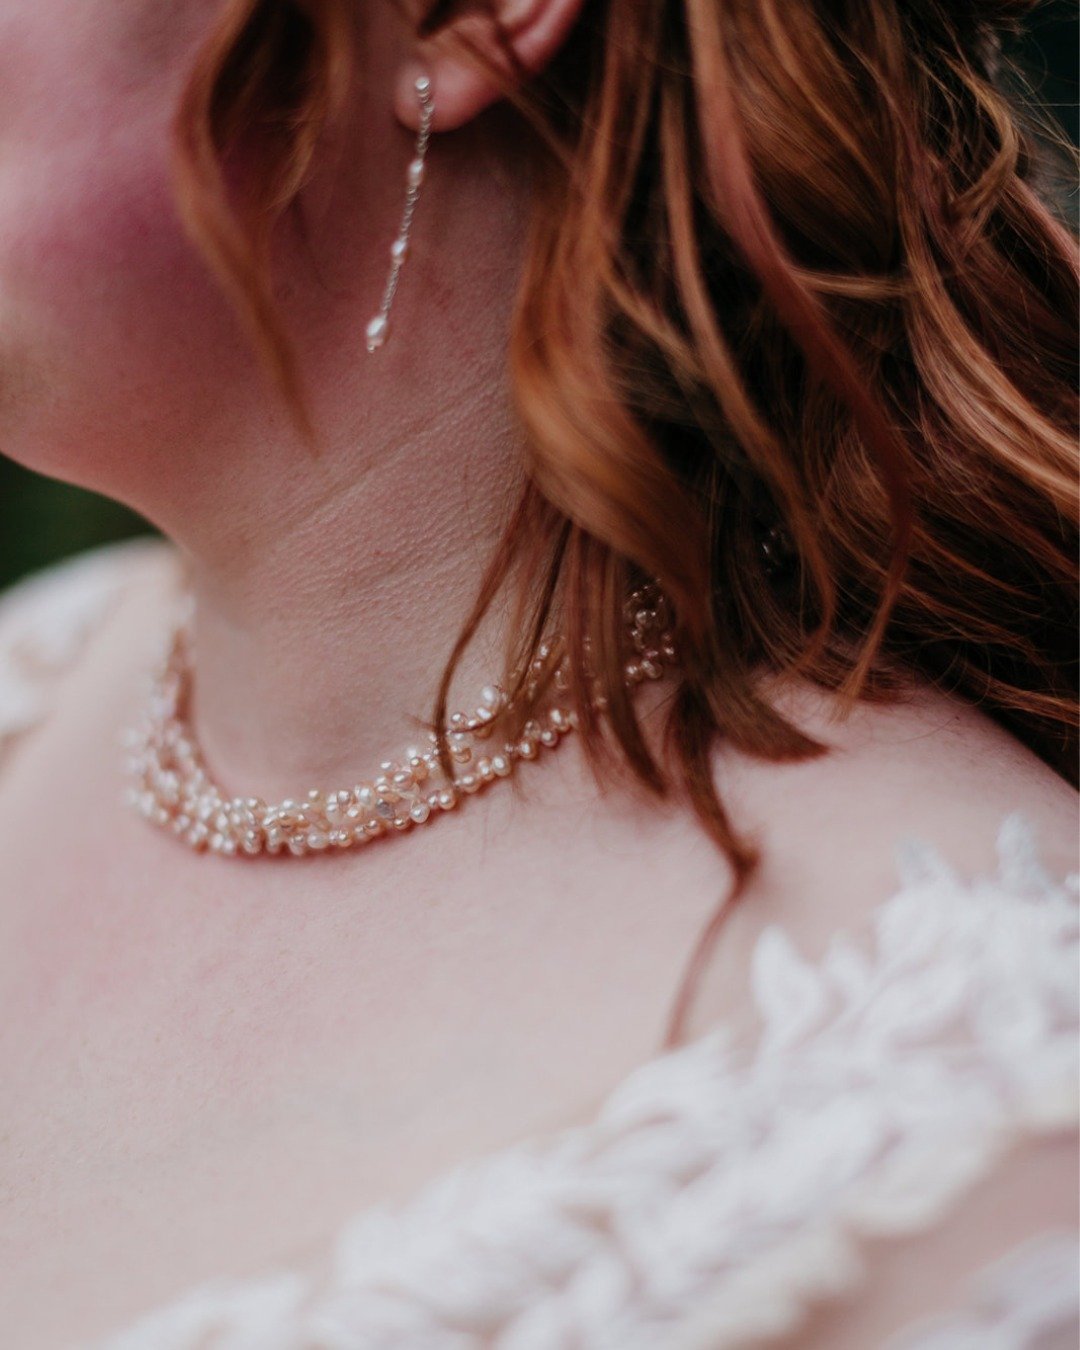 Have you considered wearing 'something old' on your wedding day?

Examples that I've seen:
	- Great-grandmother's gorgeous pearls (this wedding) 
	- Great-grandfather's cufflinks (this wedding)
	- Mother's wedding shoes
	- Best friend's necklace
	- F